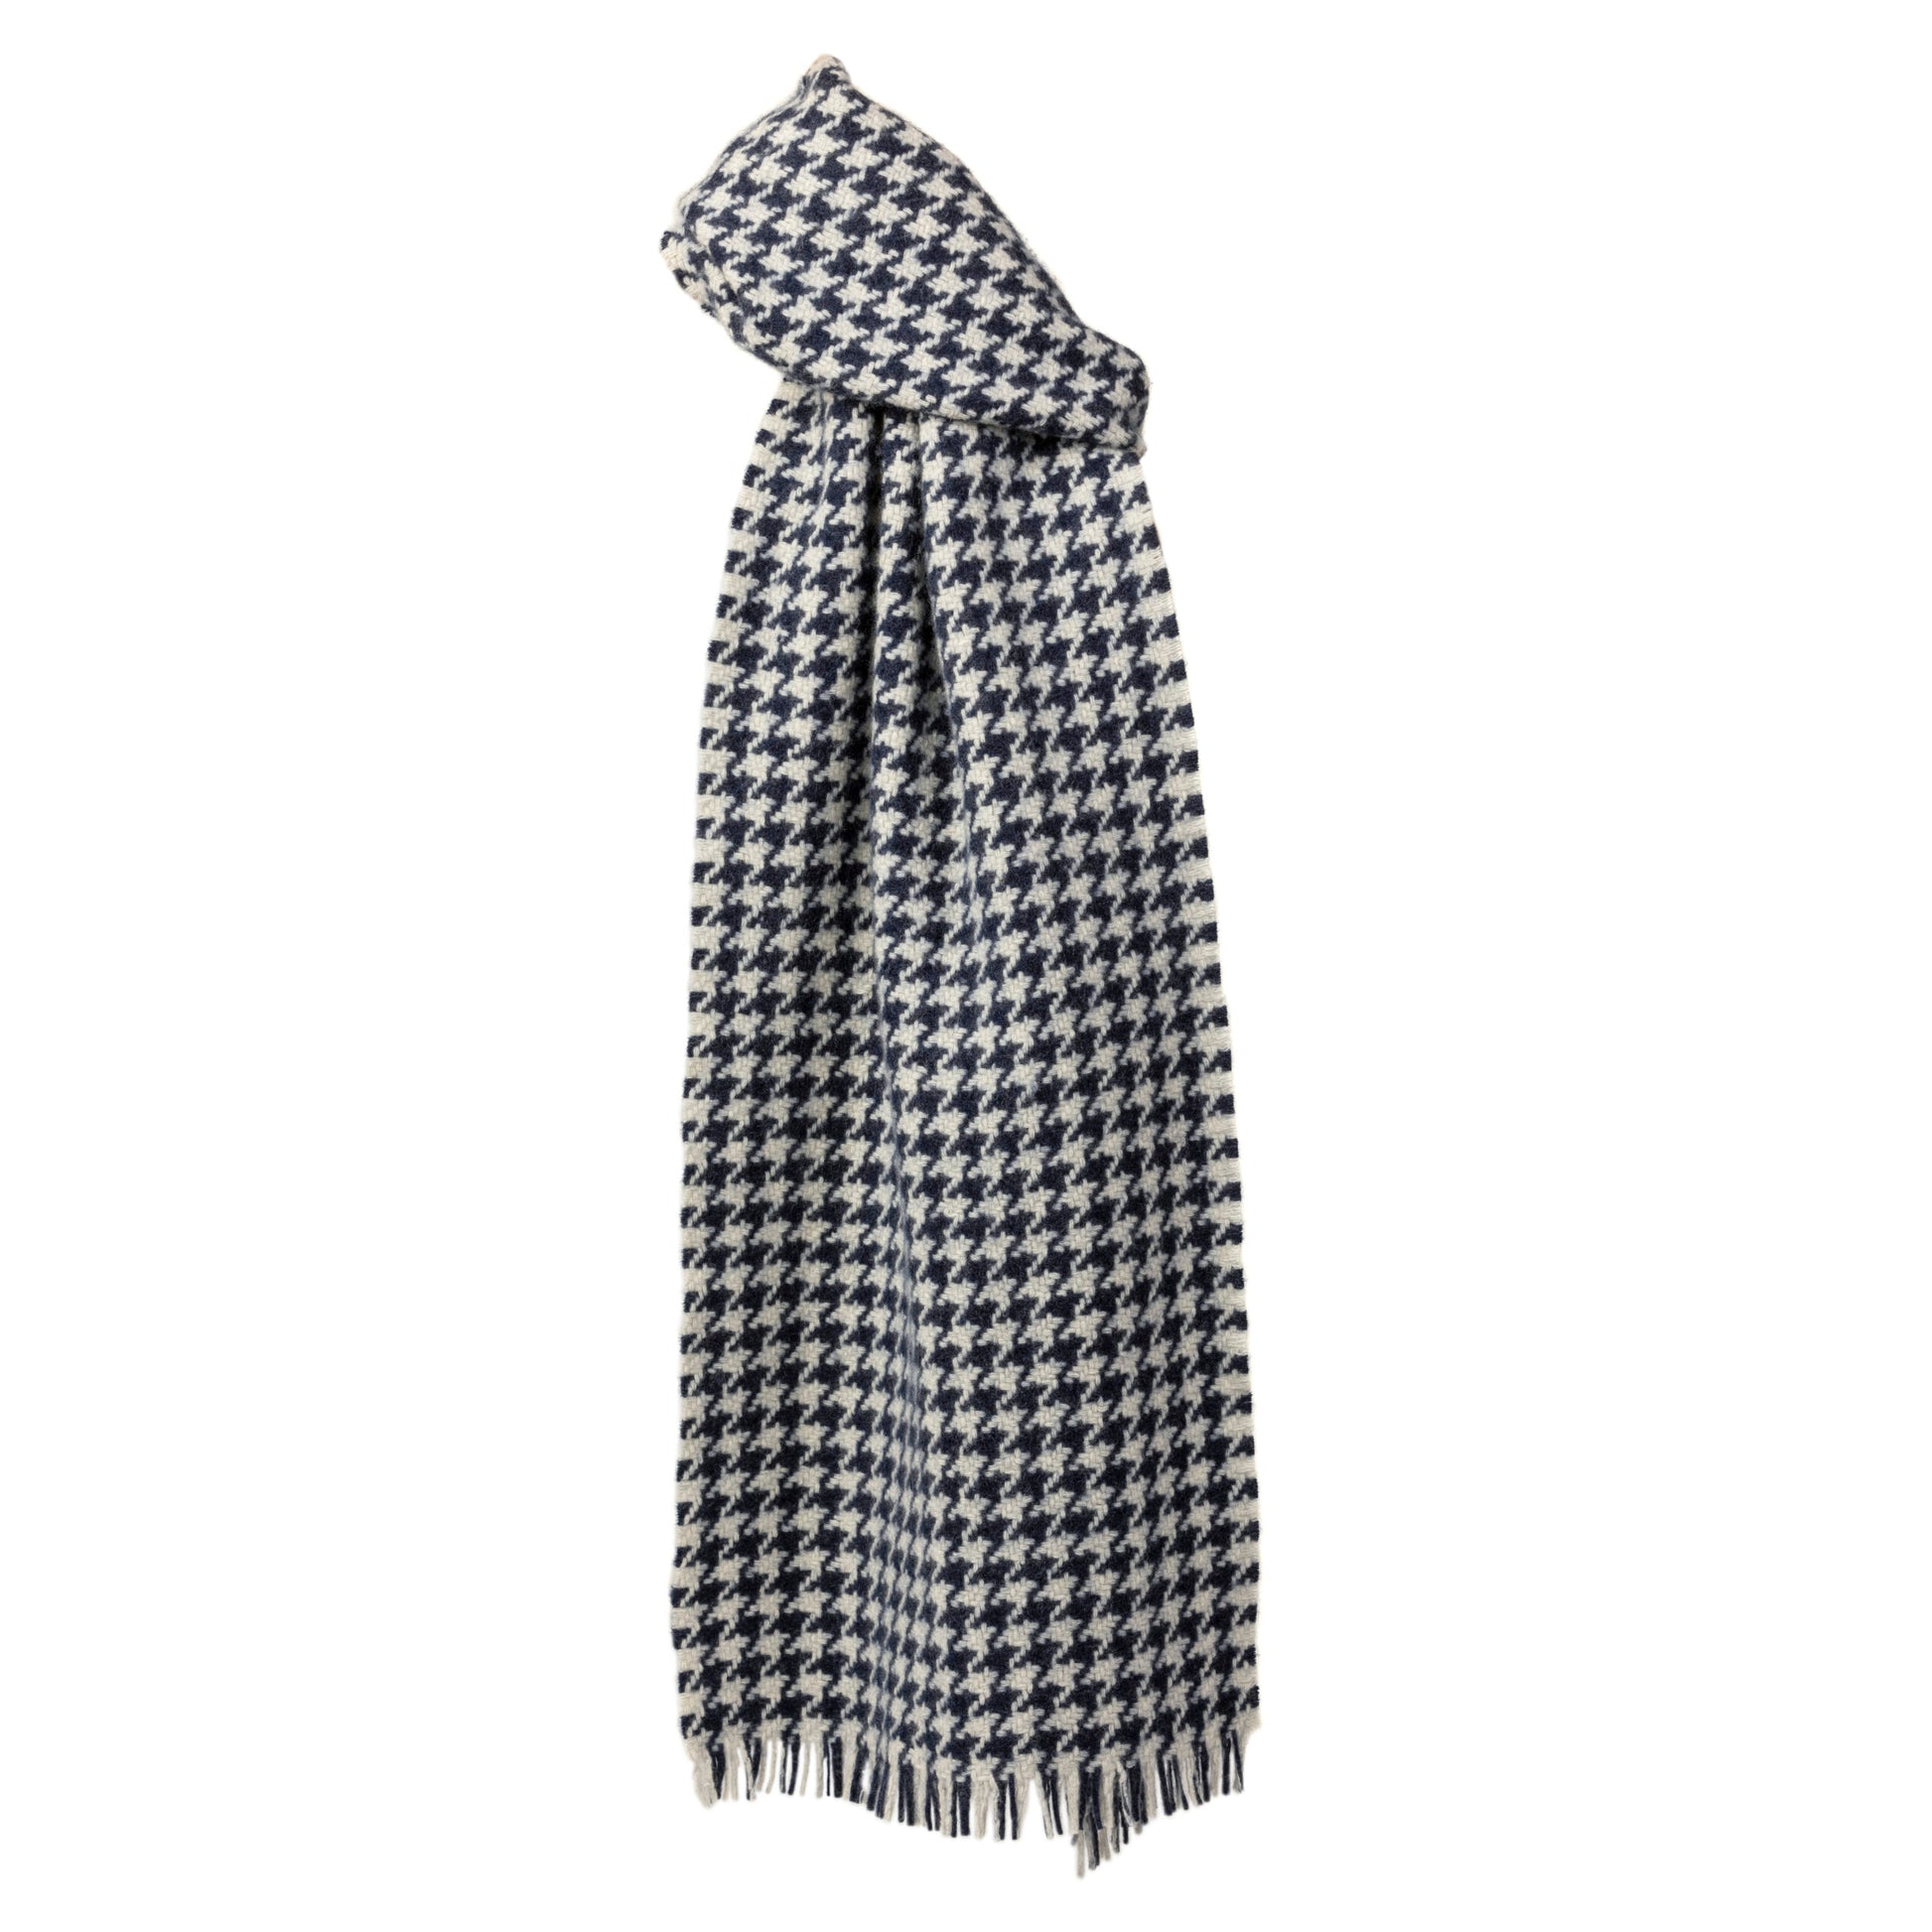 Houndstooth navy scarf made from 100% cashmere. Scottish Textiles Showcase. 